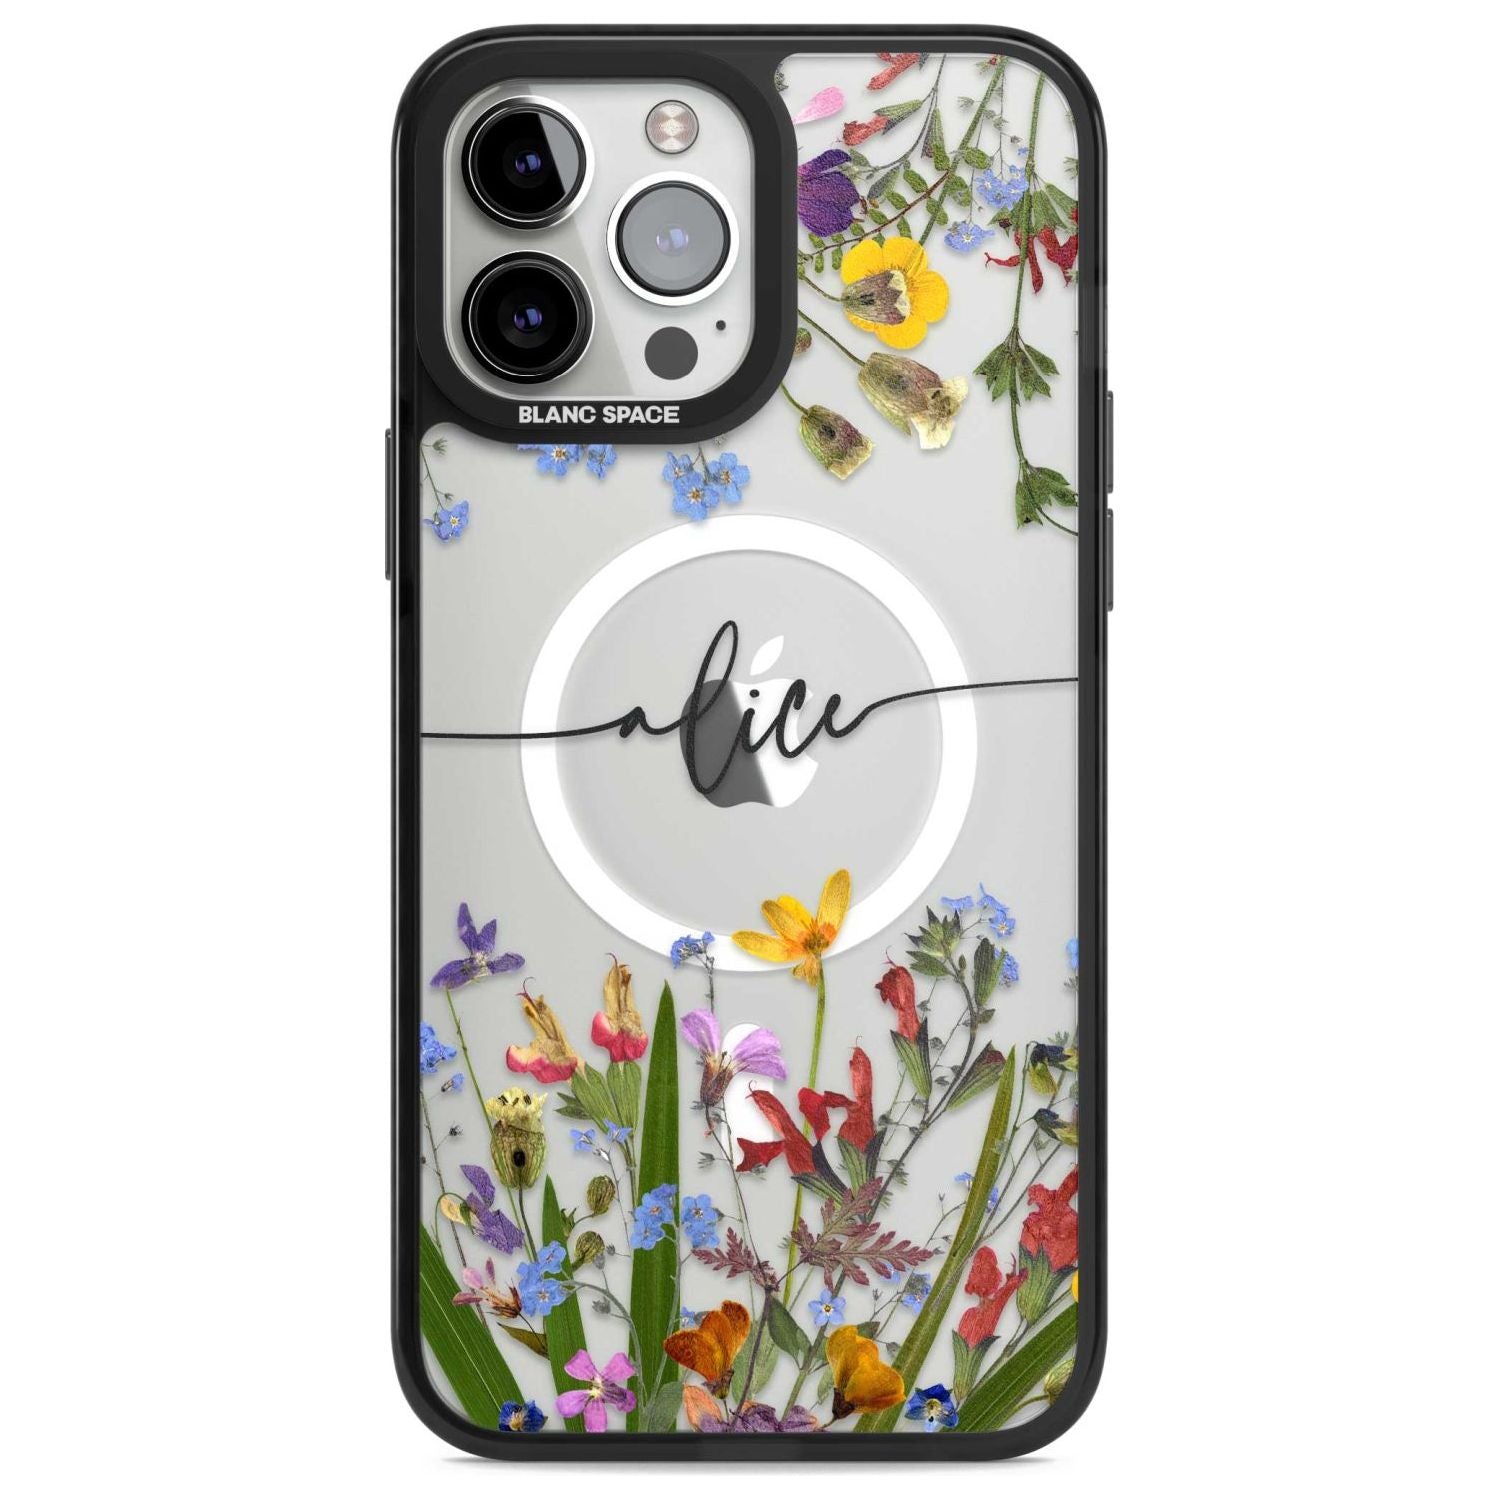 Personalised Wildflower Floral Custom Phone Case iPhone 13 Pro Max / Magsafe Black Impact Case Blanc Space